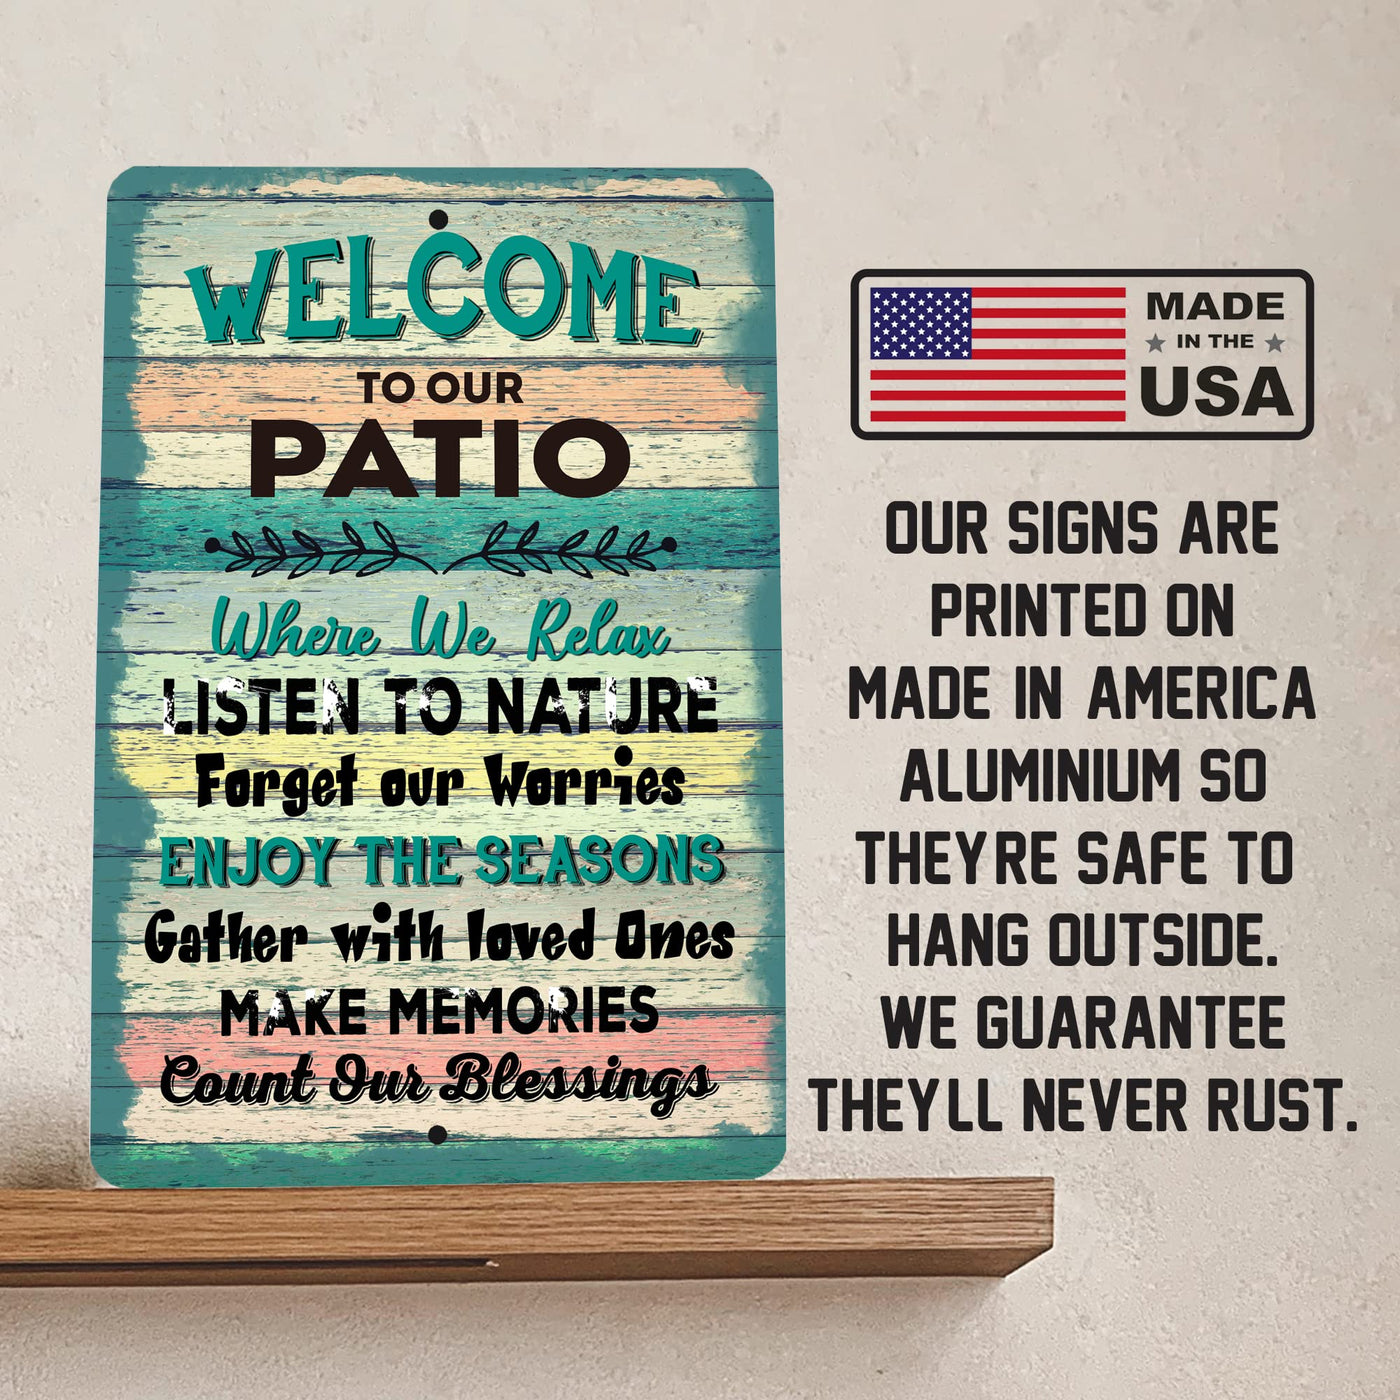 Welcome To Our Patio - Where We Relax Metal Signs Vintage Wall Art -8 x 12" Funny Rustic Outdoor Metal Sign for Lake, Porch, Deck -Retro Tin Sign Decor for Home-Cabin-Lodge Accessories & Gifts!